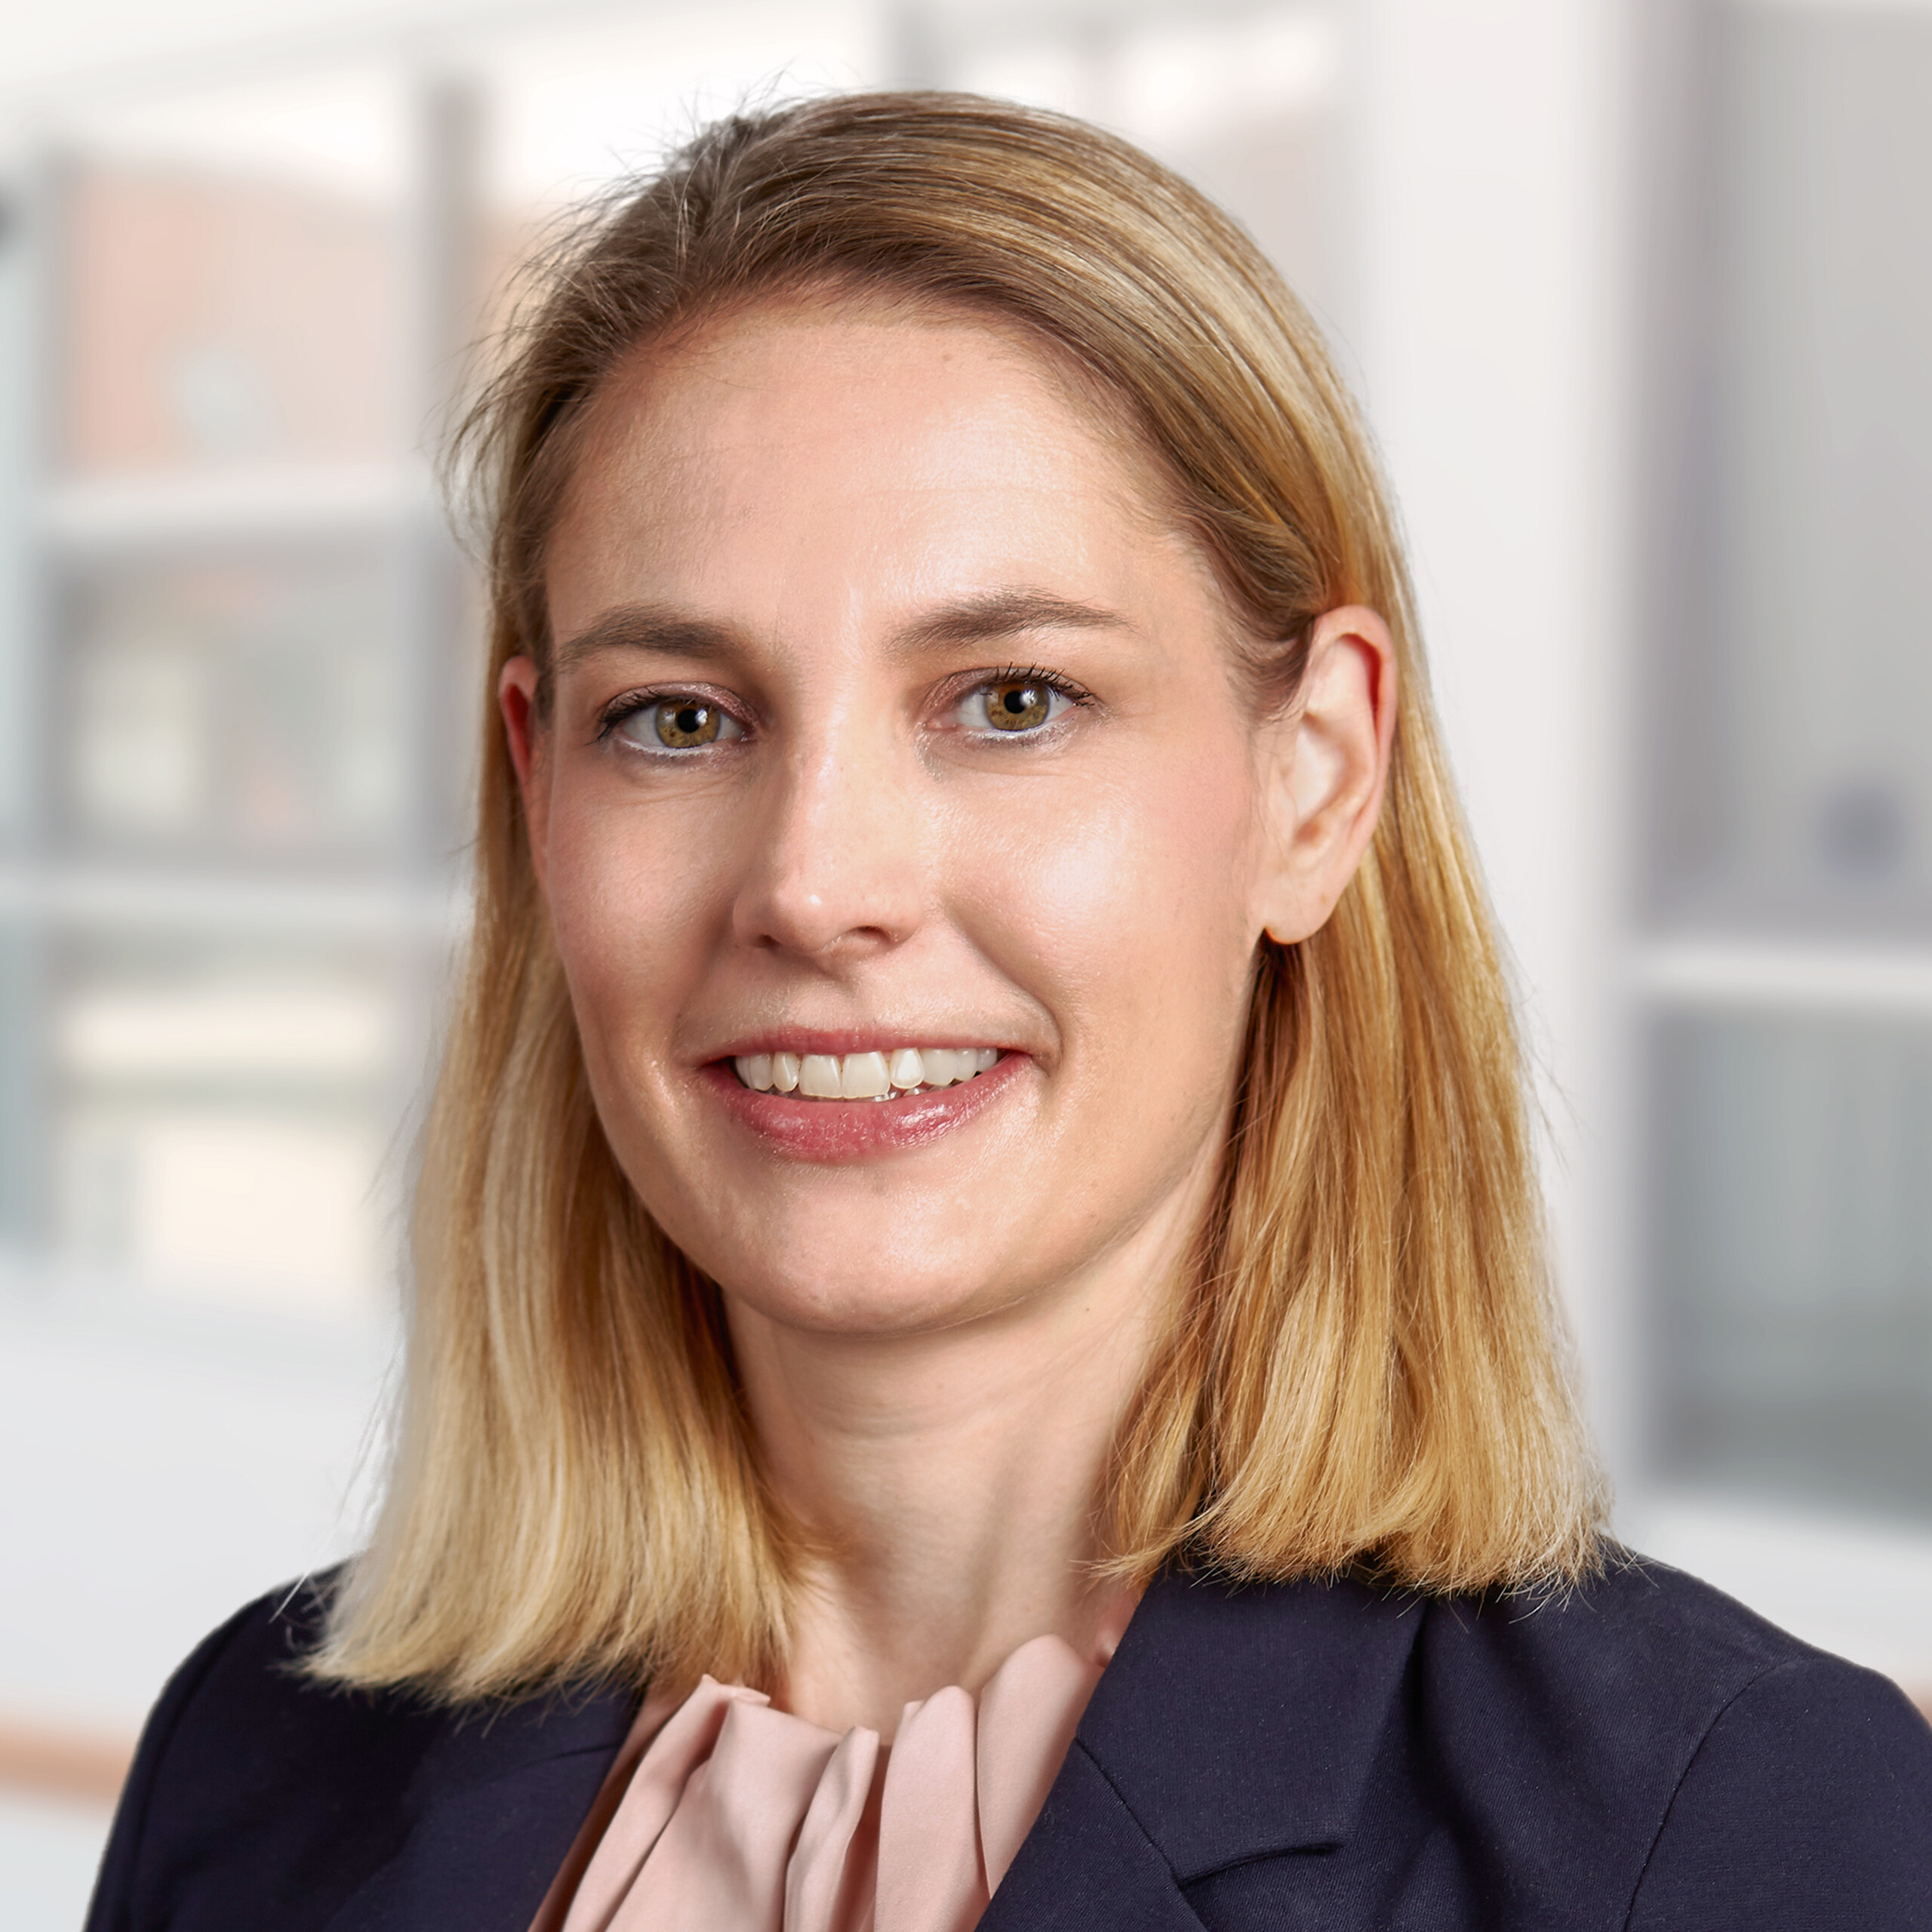 Nicole Pötsch, Head of Investment and Strategic Development for North & Central Europe at Allianz Real Estate